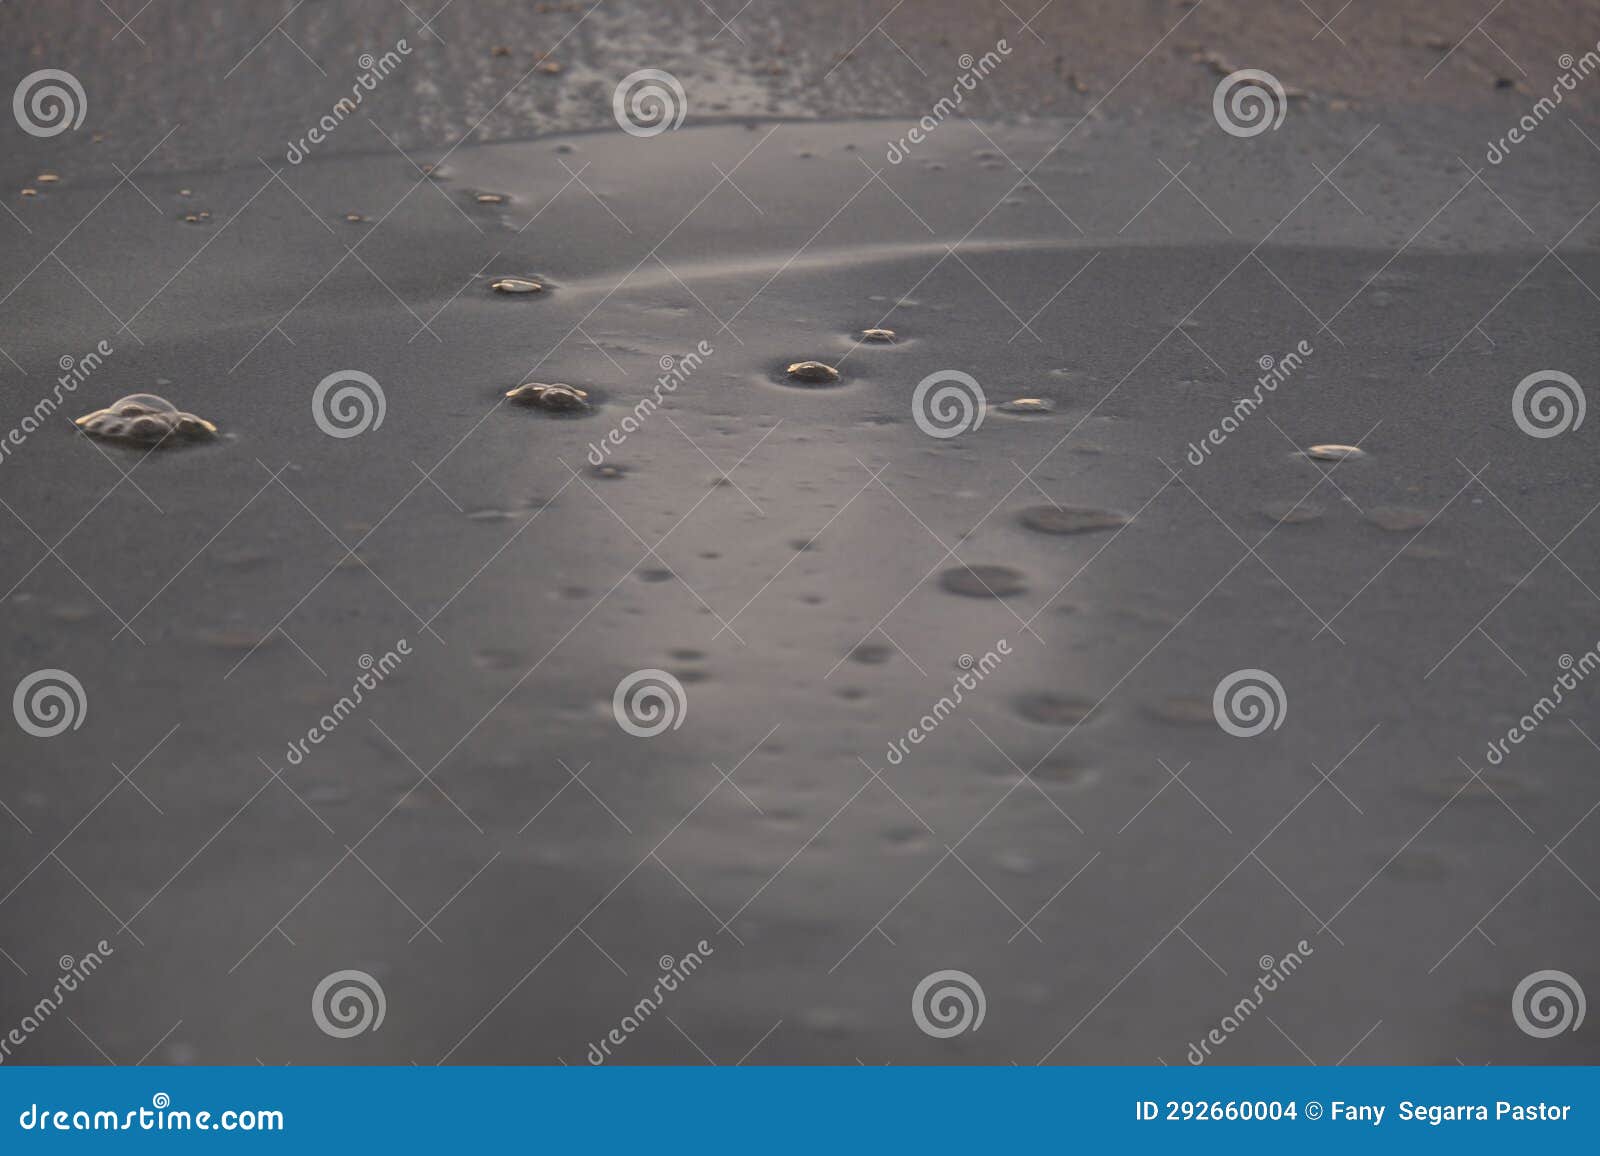 raindrops on the shore of the beach